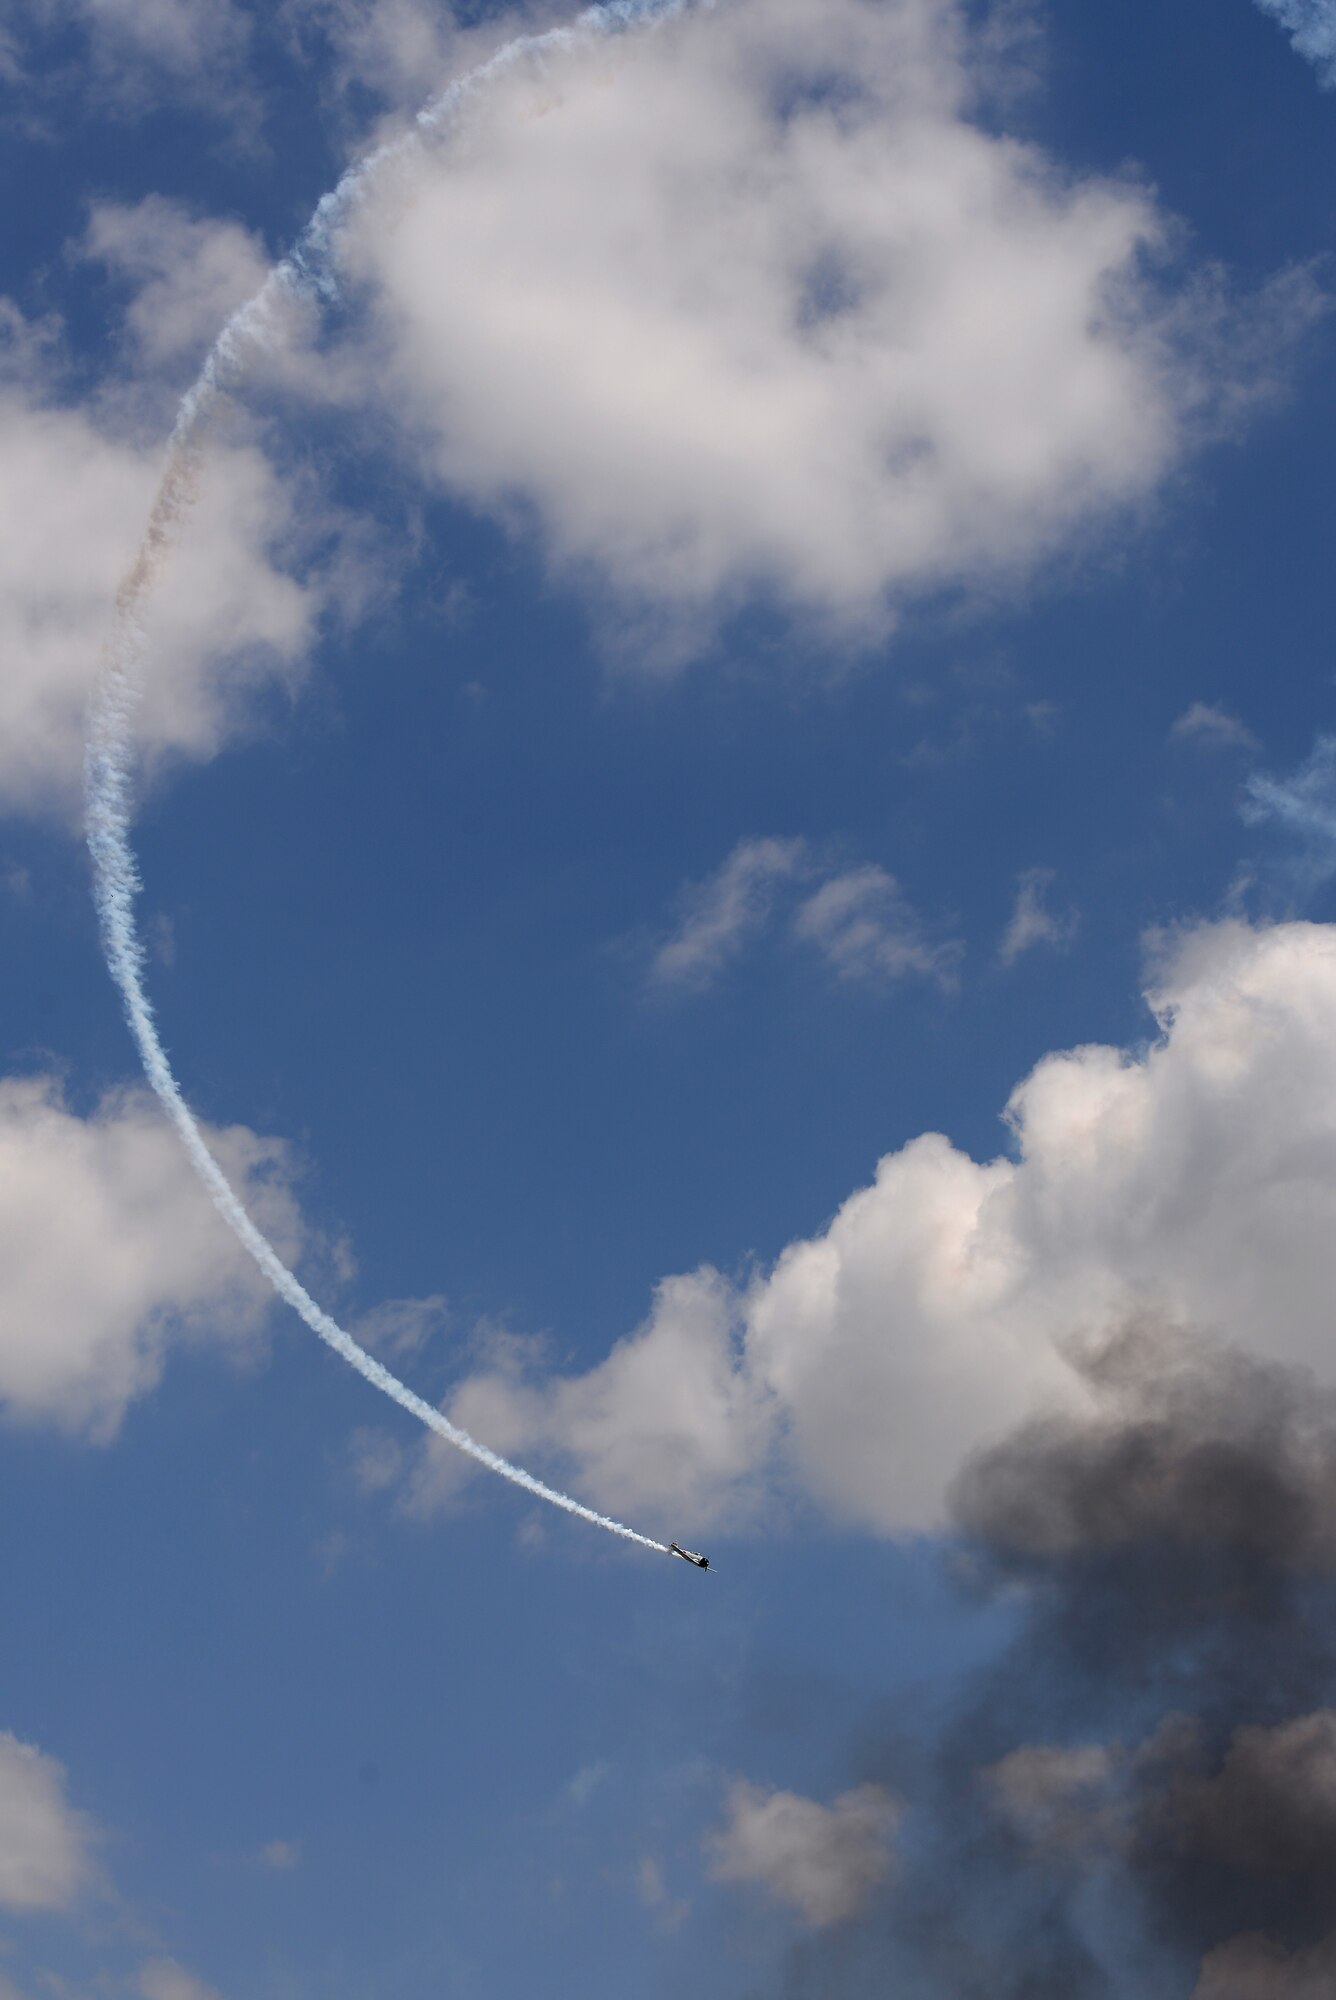 "Tora, Tora, Tora," performs the re-creation of the Dec. 7, 1941, attack on Pearl Harbor during the 100th Centennial Celebration Air Show, June 10, 2017, at Scott Air Force Base, Ill. The motto of the Commemorative Air Force and the "Tora" act is "Lest We Forget." Tora is not intended to promote nationalism or glorify war. The intent of the Tora group is to help generations of individuals throughout the world born after World War II understand that war does not discriminate in the pain it causes and that courageous individuals on both sides lose their lives.  (U.S. Air Force photo by Tech. Sgt. Jonathan Fowler)